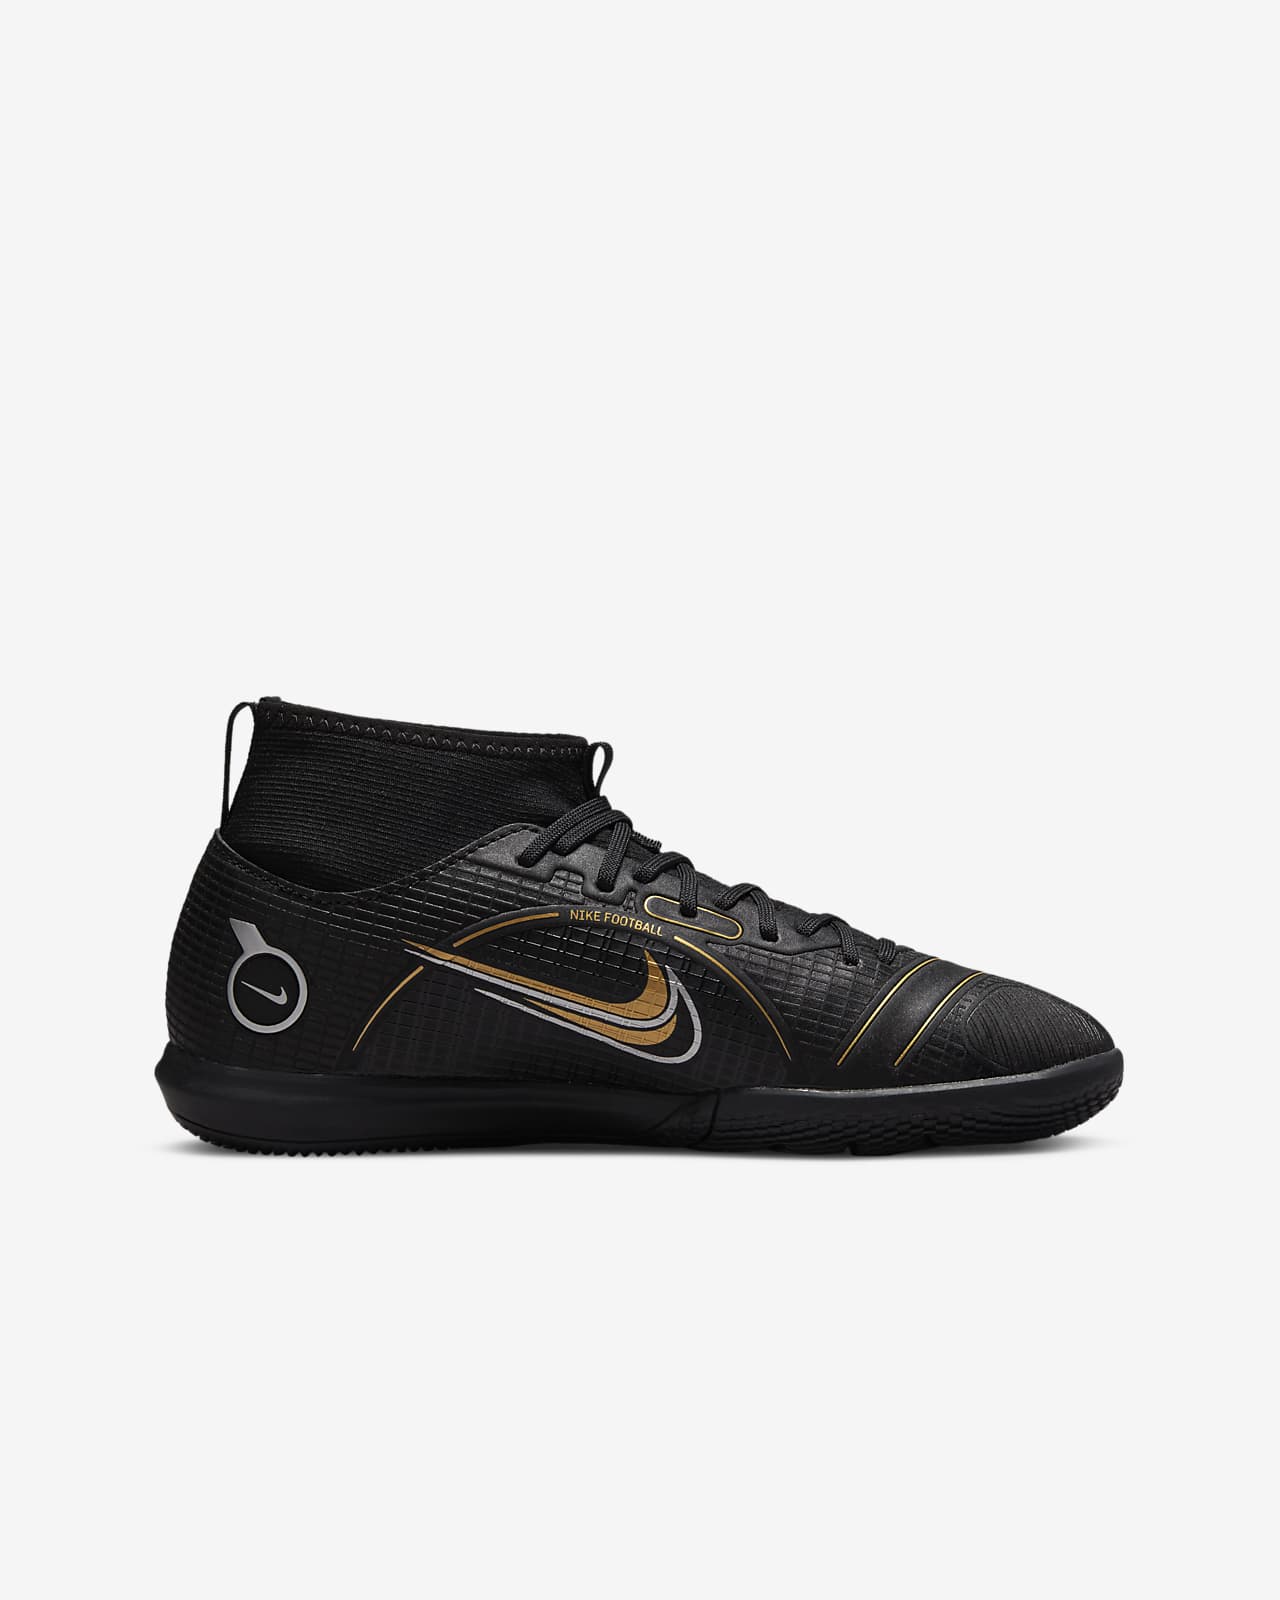 Nike Mercurial Indoor Soccer Shoes | lupon.gov.ph